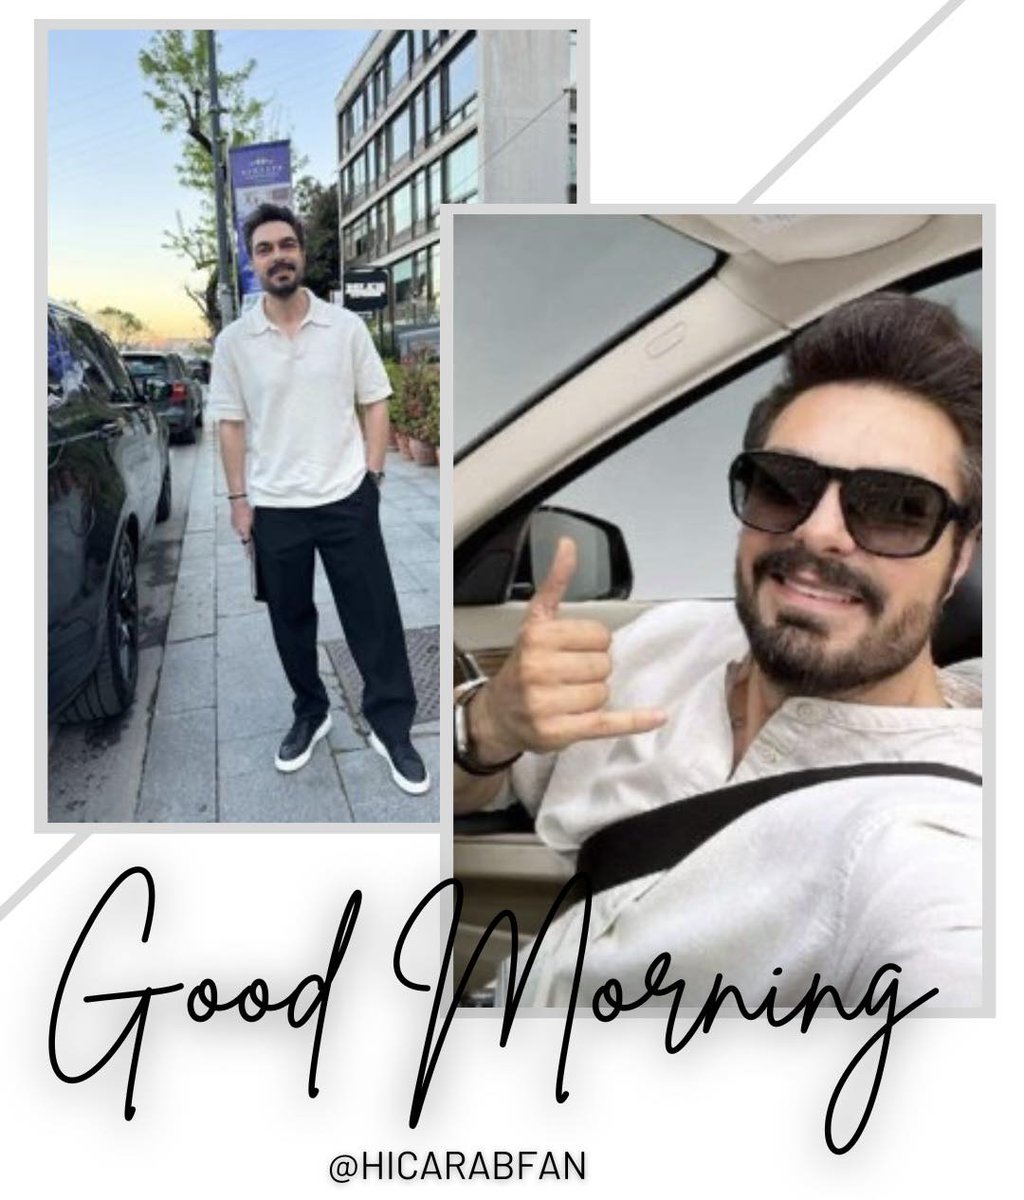 Good Morning. Stay blessed, healthy and happy 😊

#HalilİbrahimCeyhan